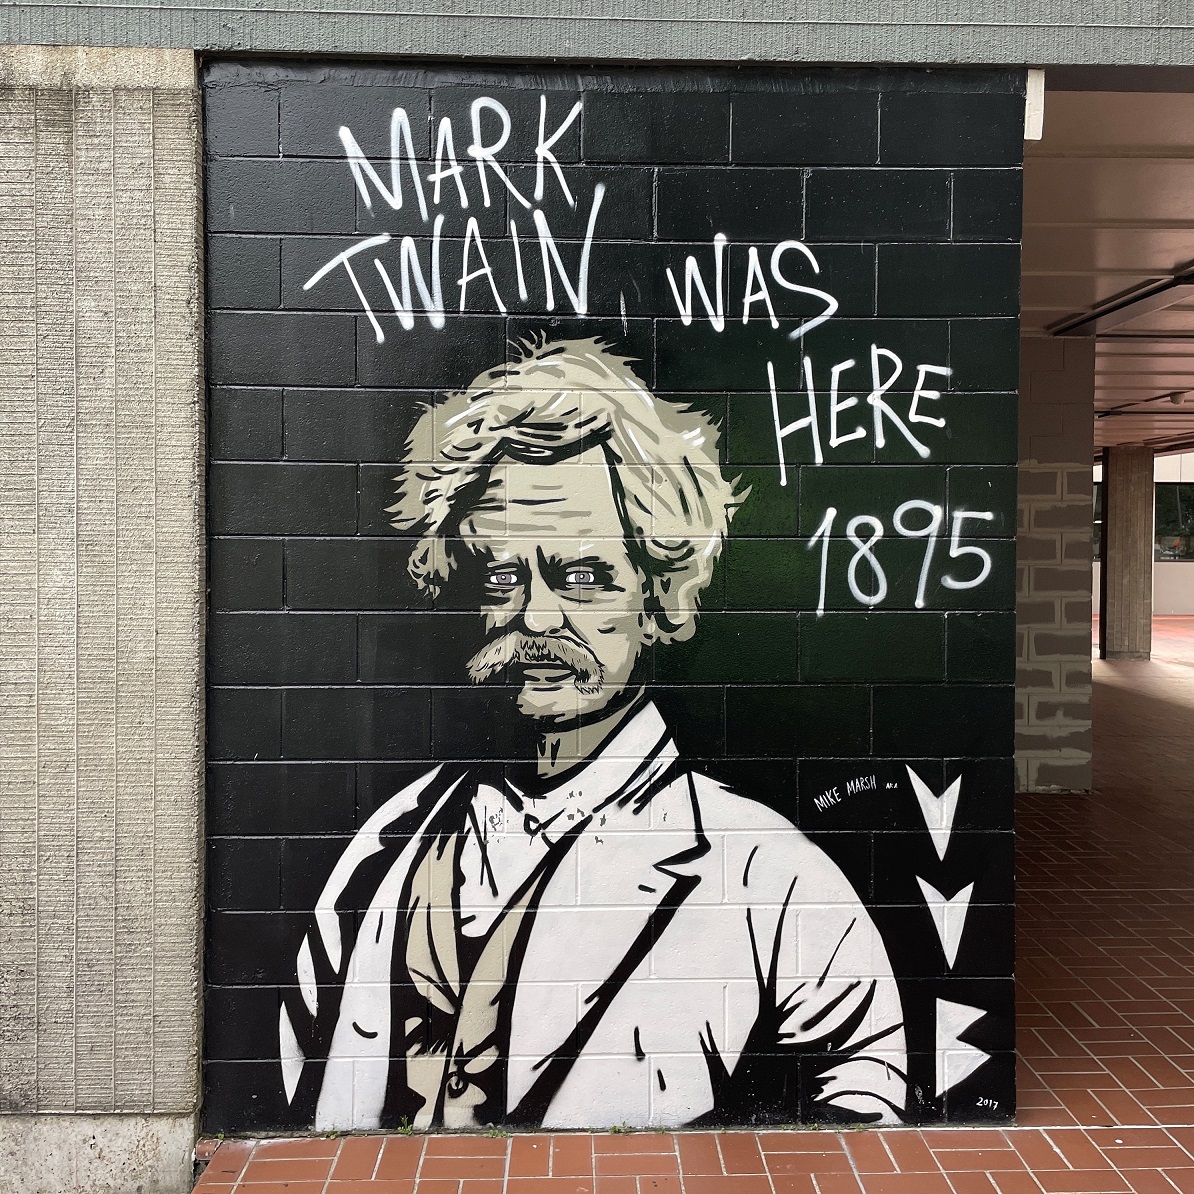 Street art painting of Mark Twain on the outside of the Civic Administration Building